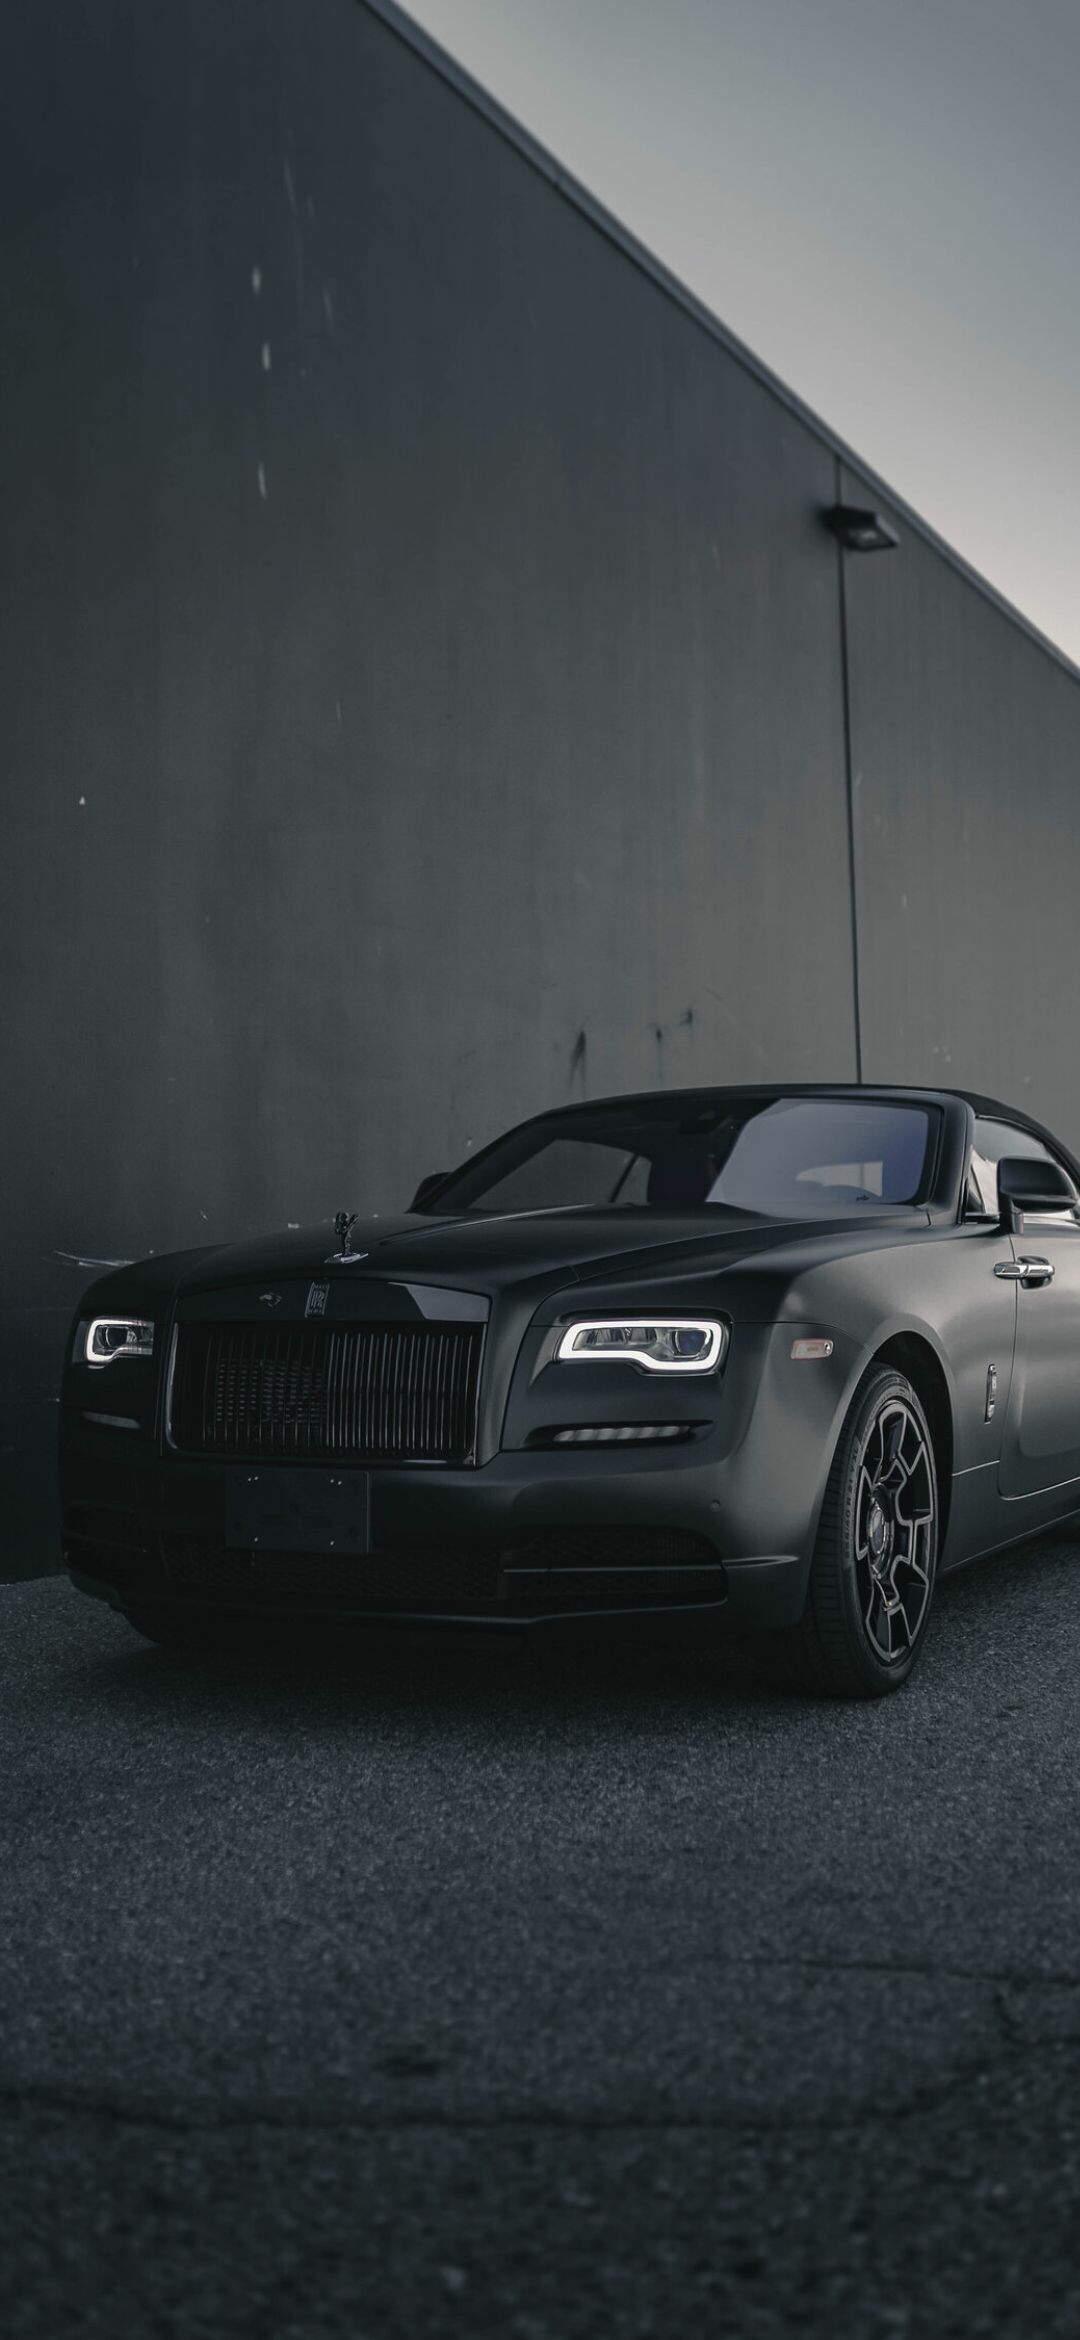 Rolls-Royce: Wraith was launched at the Geneva Motor Show on 5 March 2013. 1080x2340 HD Background.